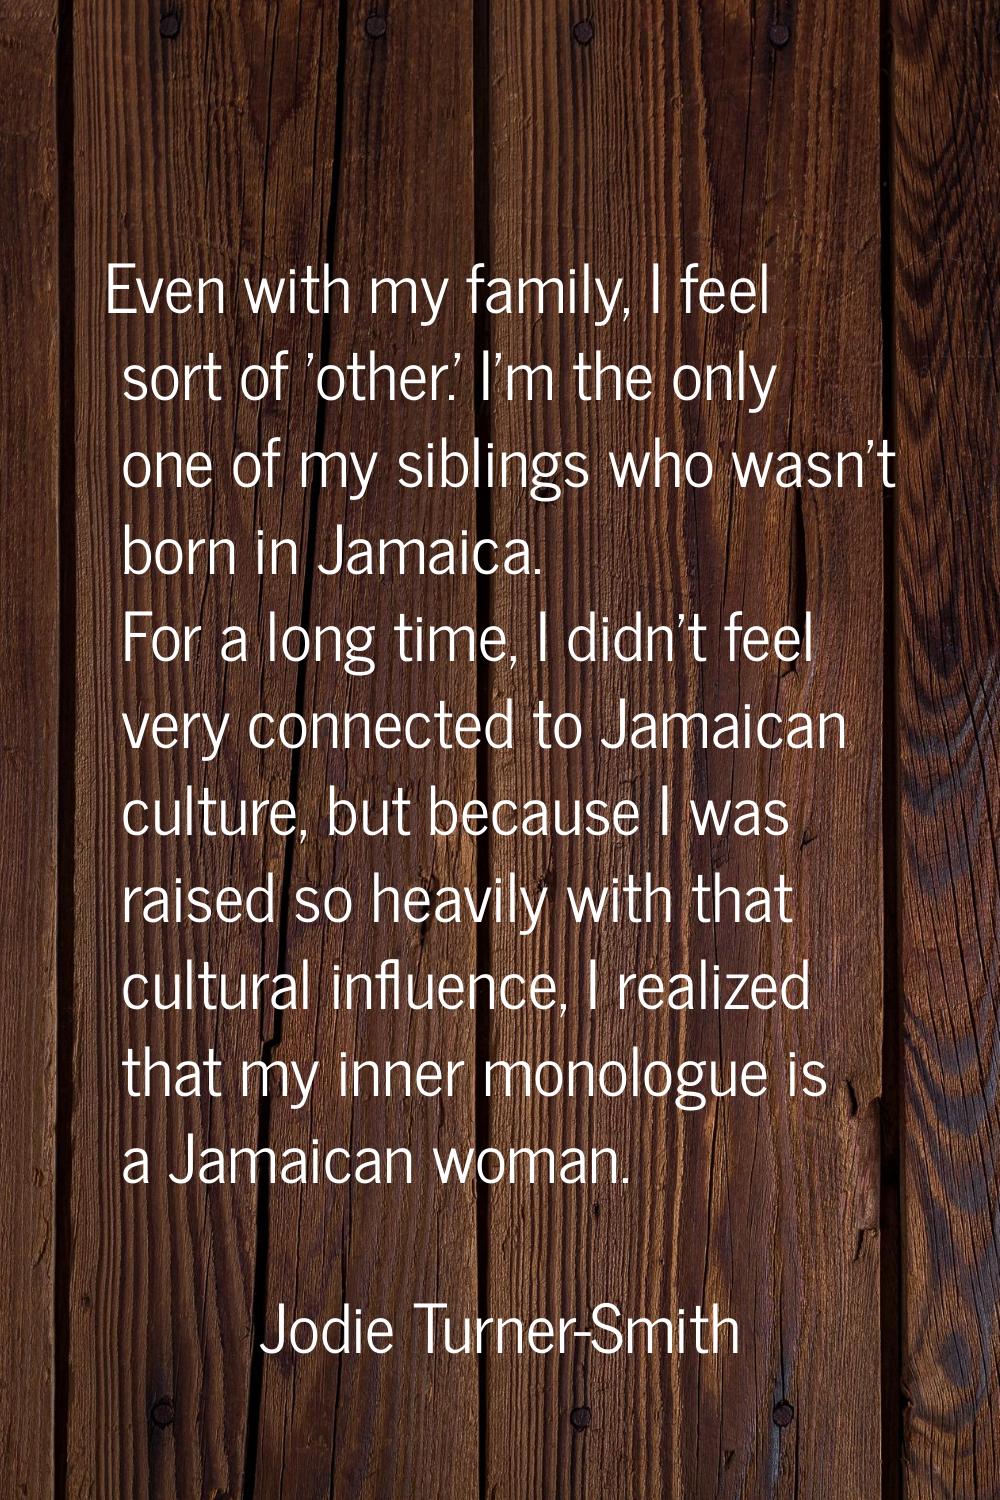 Even with my family, I feel sort of 'other.' I'm the only one of my siblings who wasn't born in Jam